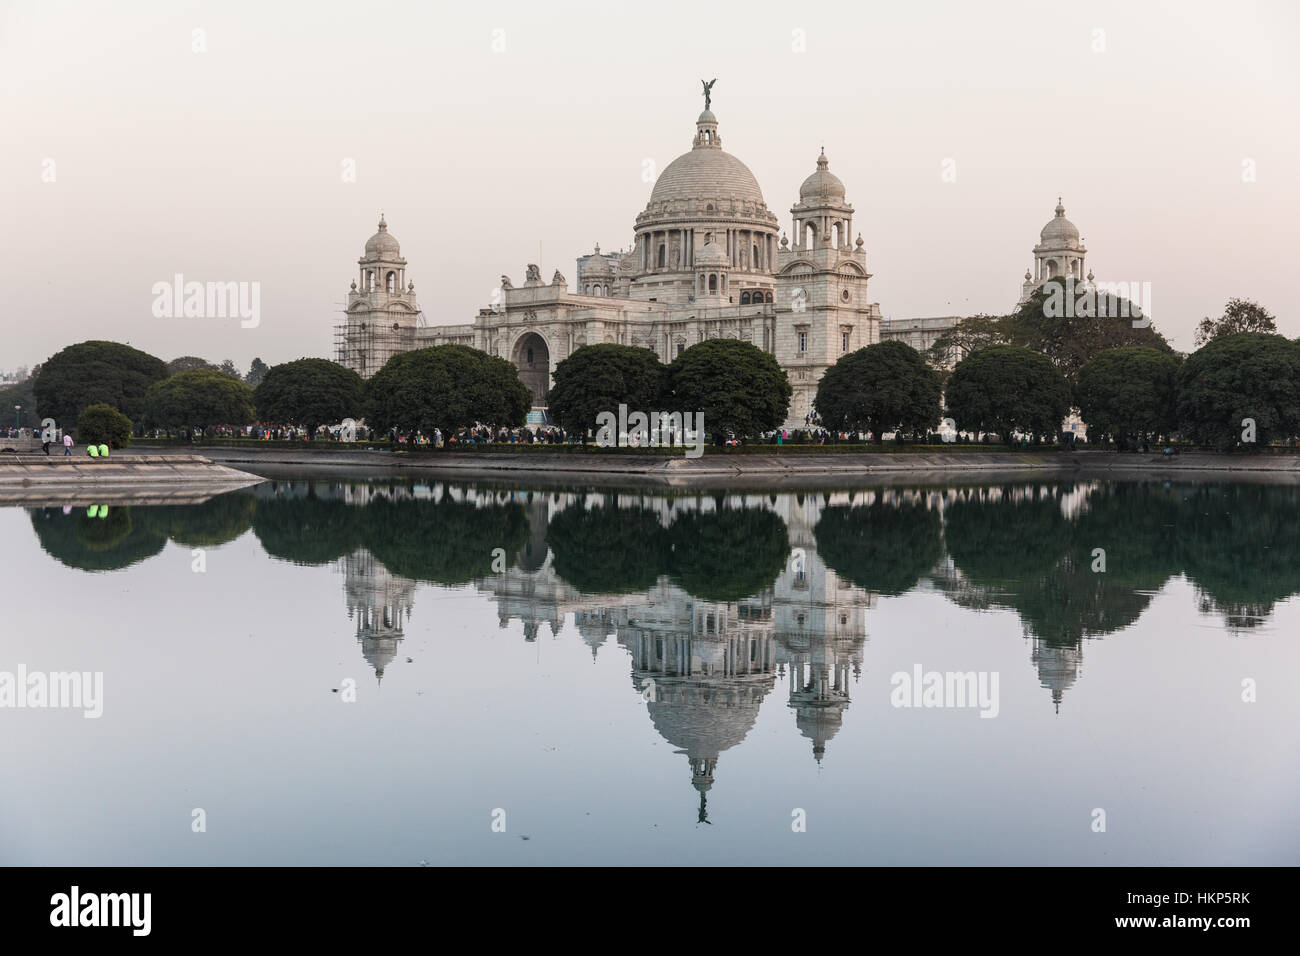 The Victoria Memorial and reflection in Kolkata (Calcutta), West Bengal, India Stock Photo